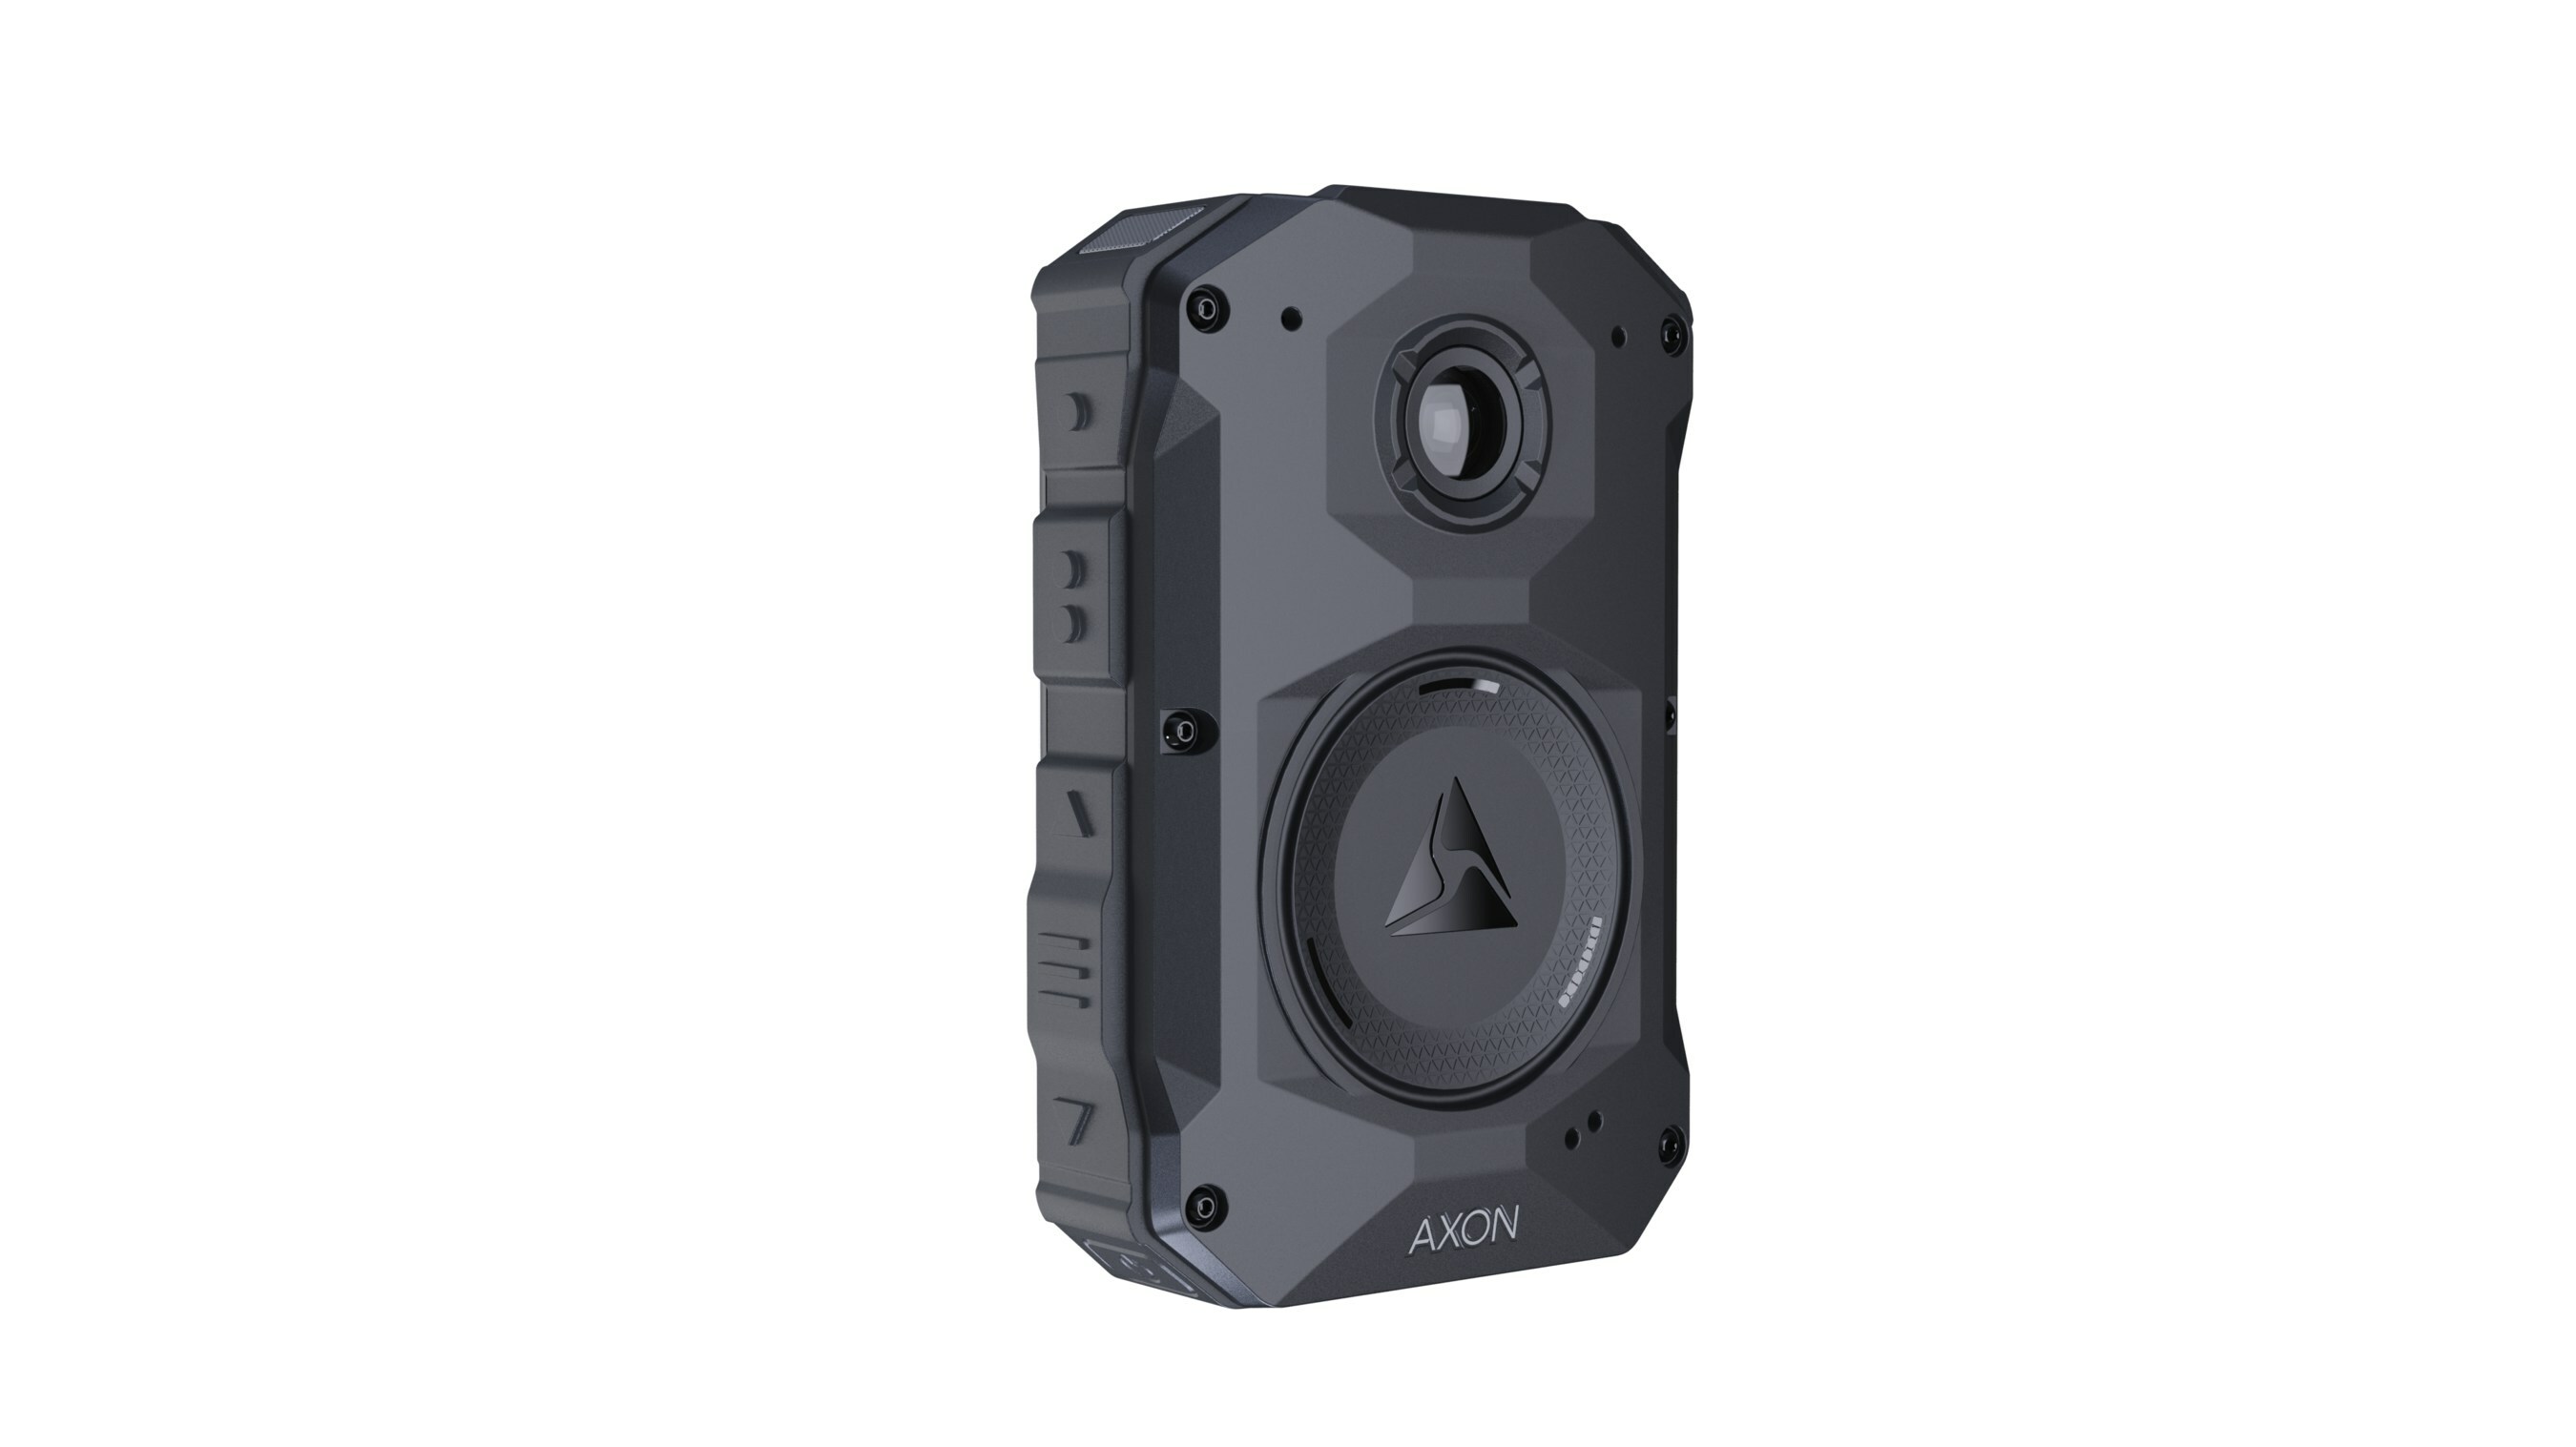 Axon launches Axon Body 4 body camera for an improved user experience